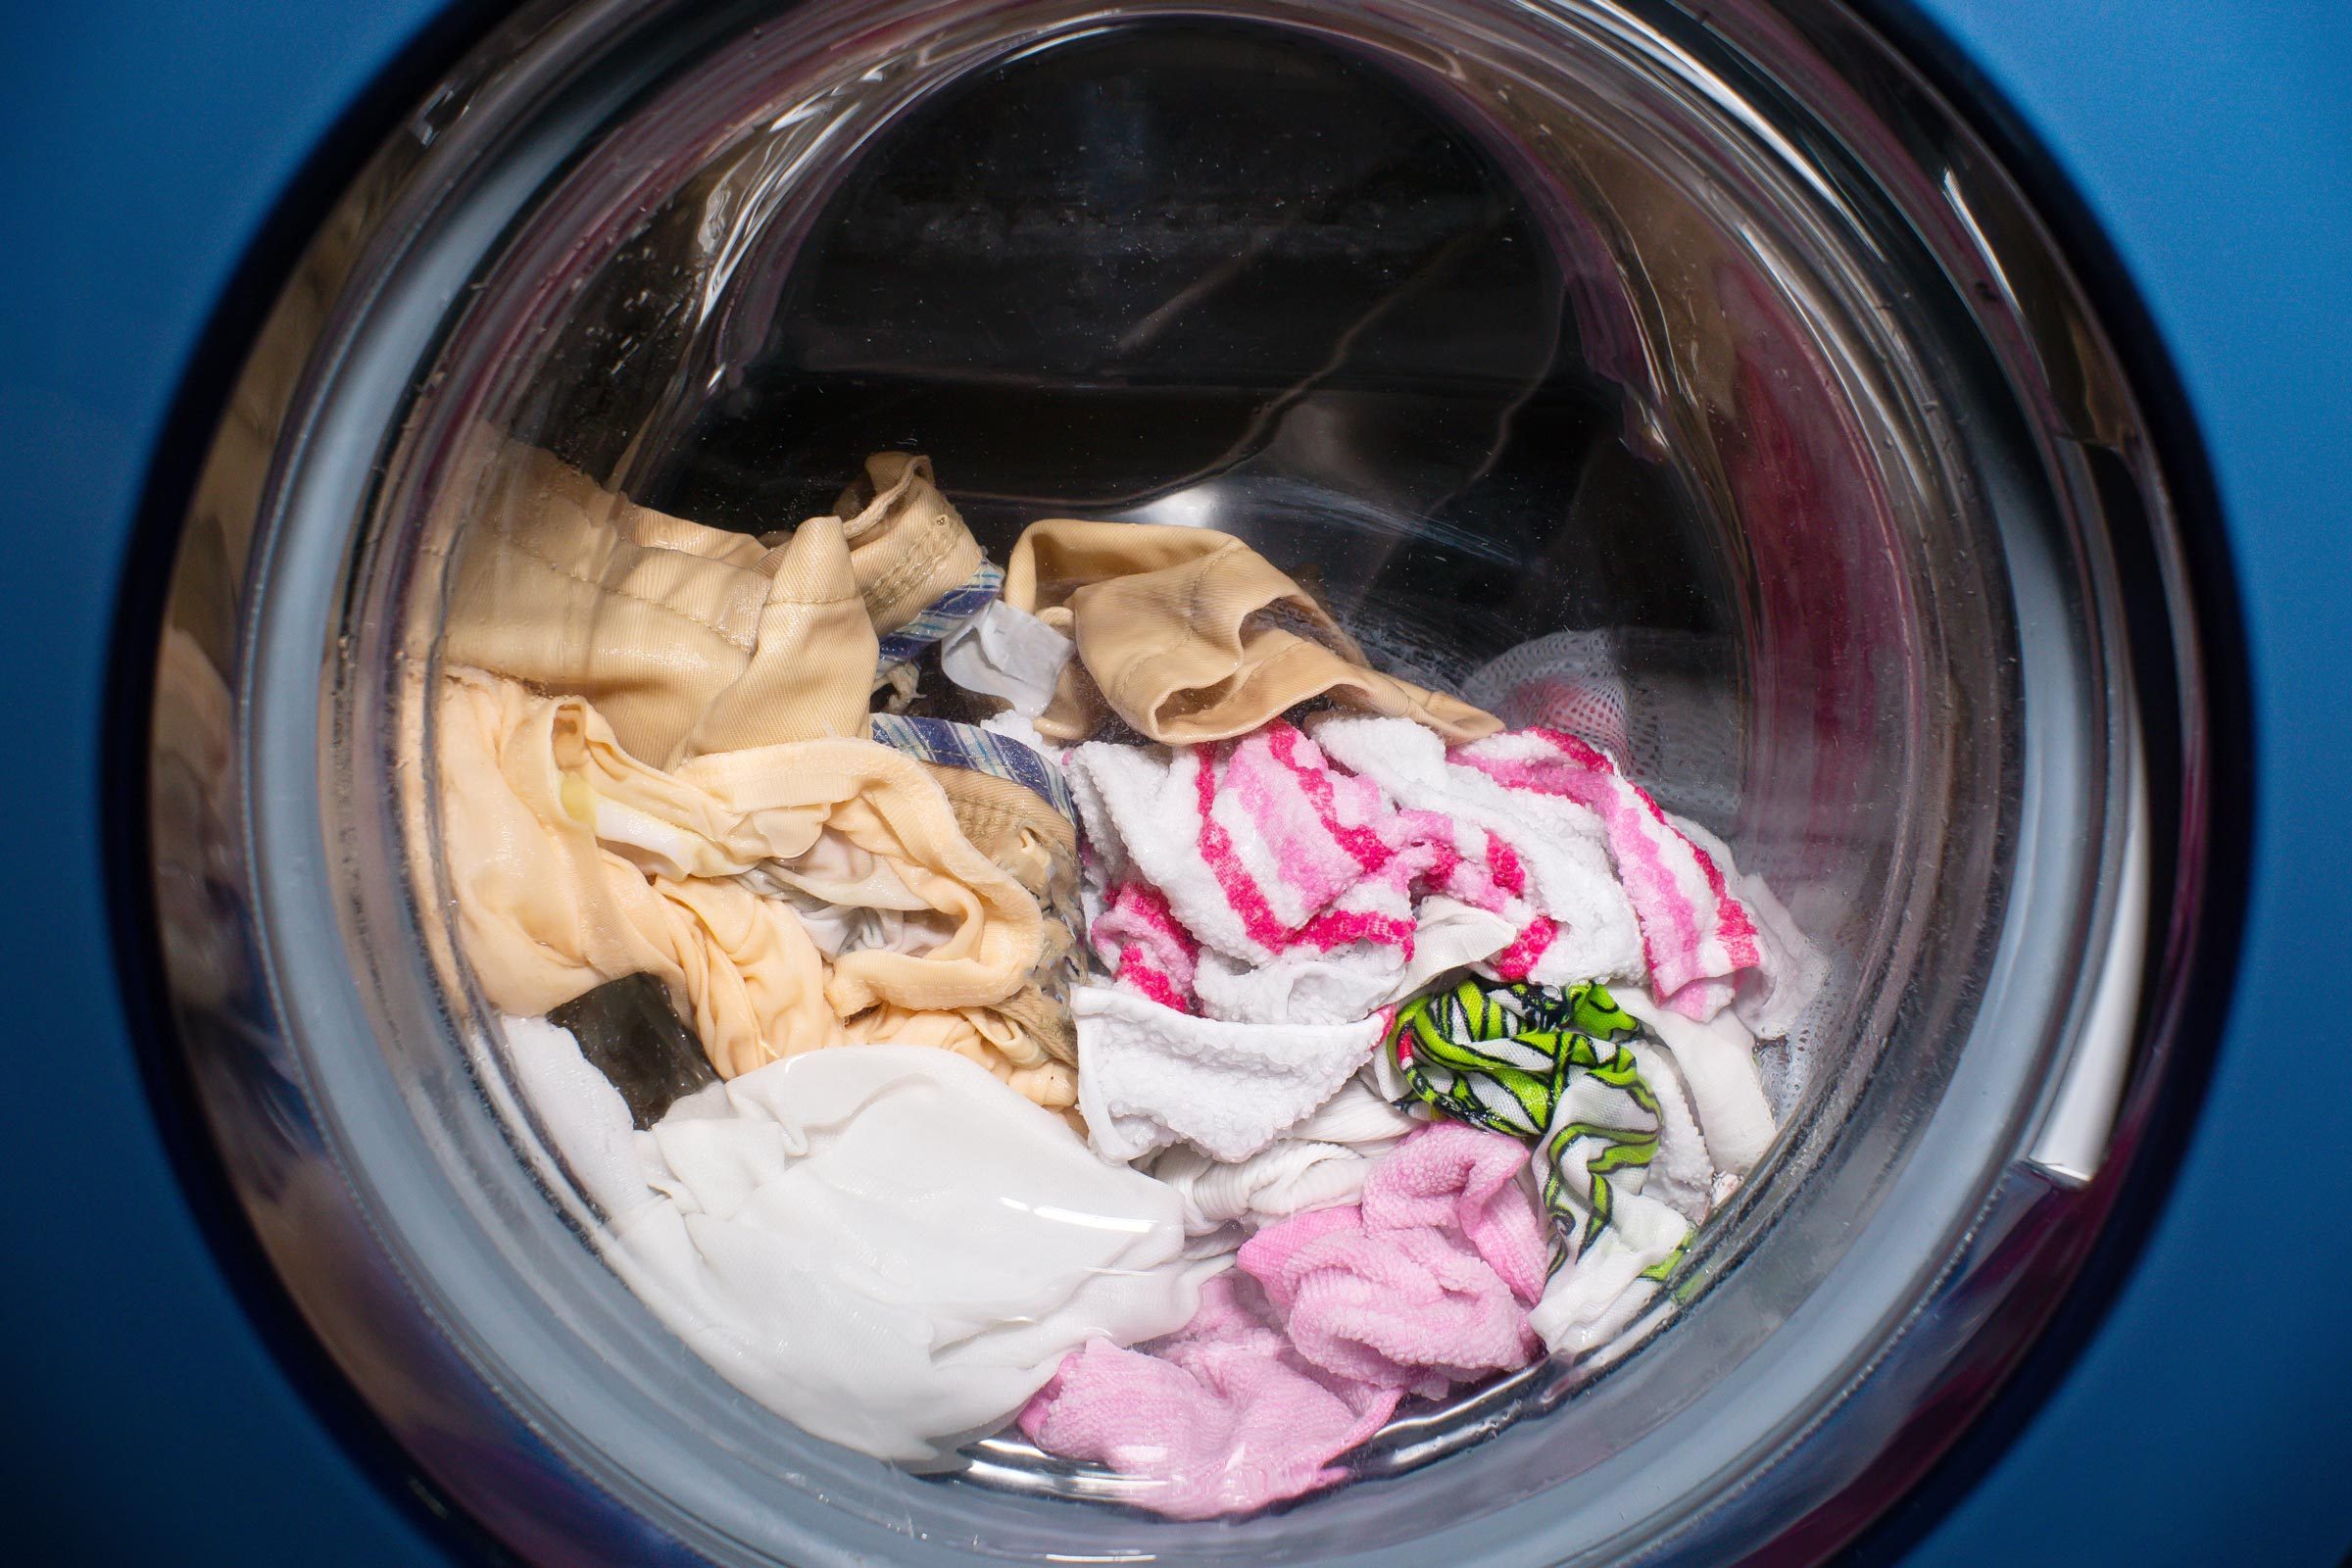 How Much Laundry Detergent To Use - Laundry Tips